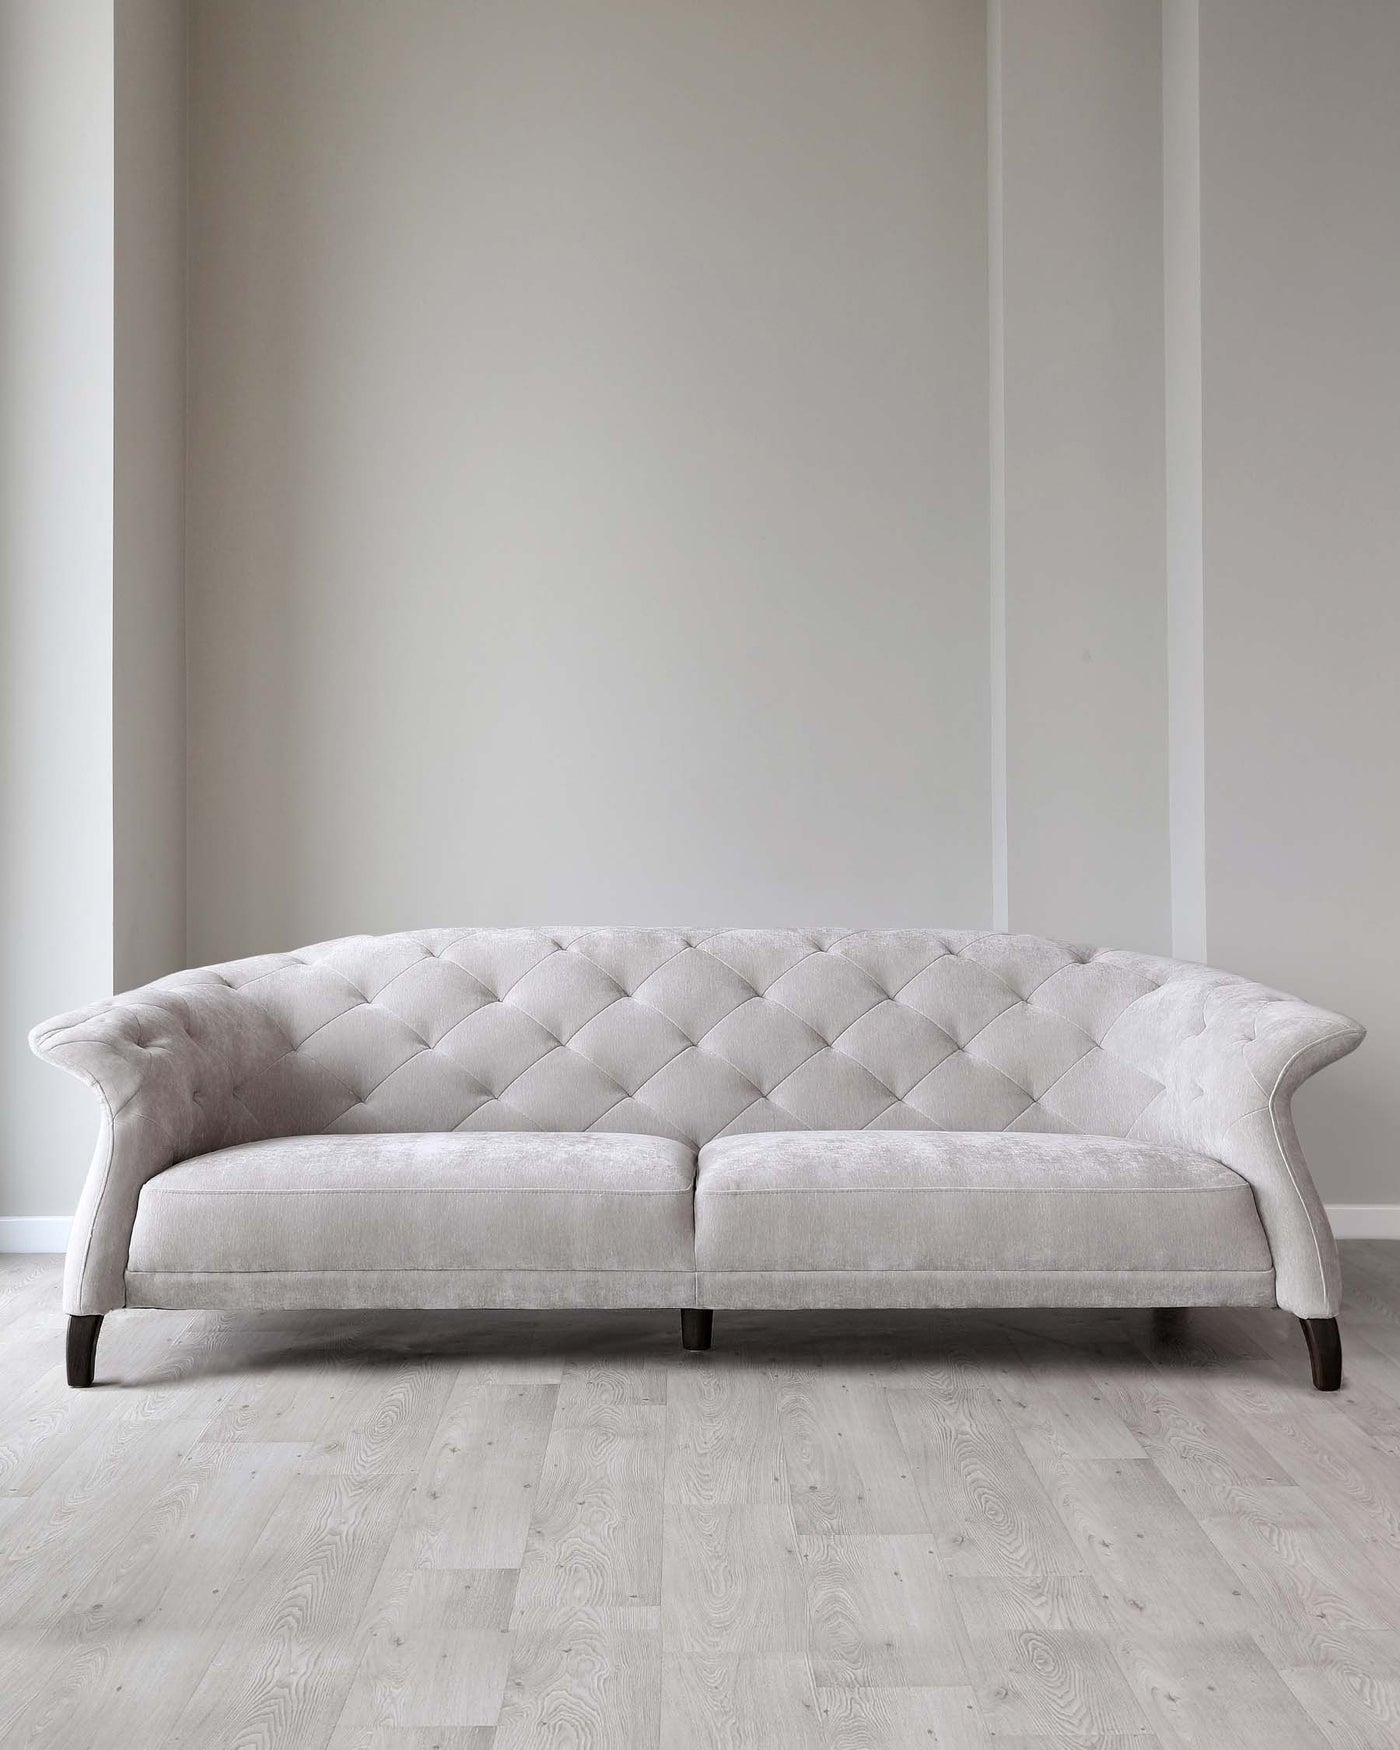 Elegant light grey tufted fabric sofa with curved armrests and dark wooden legs set against a neutral-toned wall and light hardwood floor.